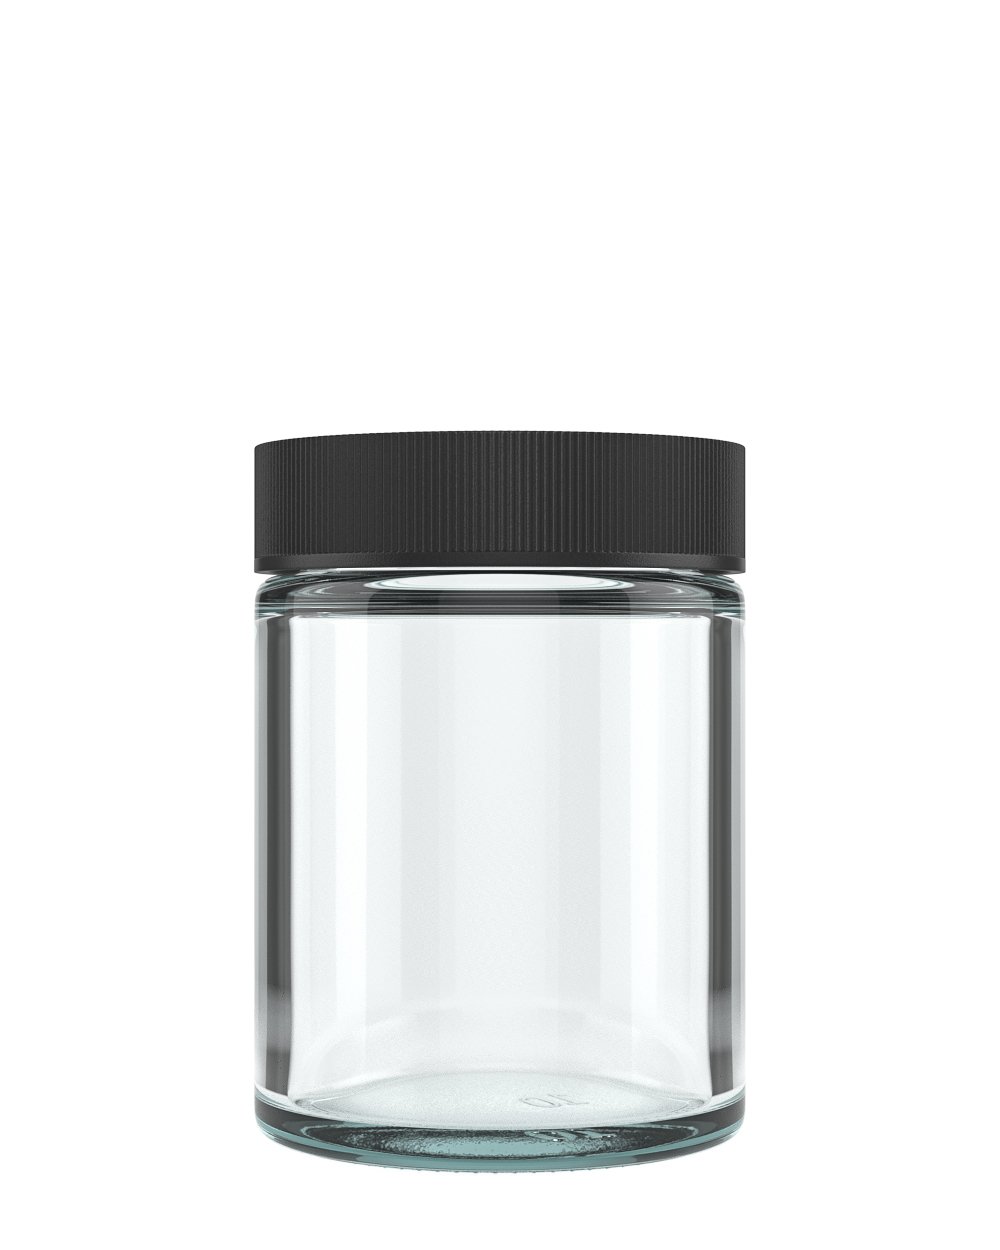 Child Resistant | Straight Sided Clear Glass Jars with Black Cap | 50mm - 4oz - 100 Count - 1